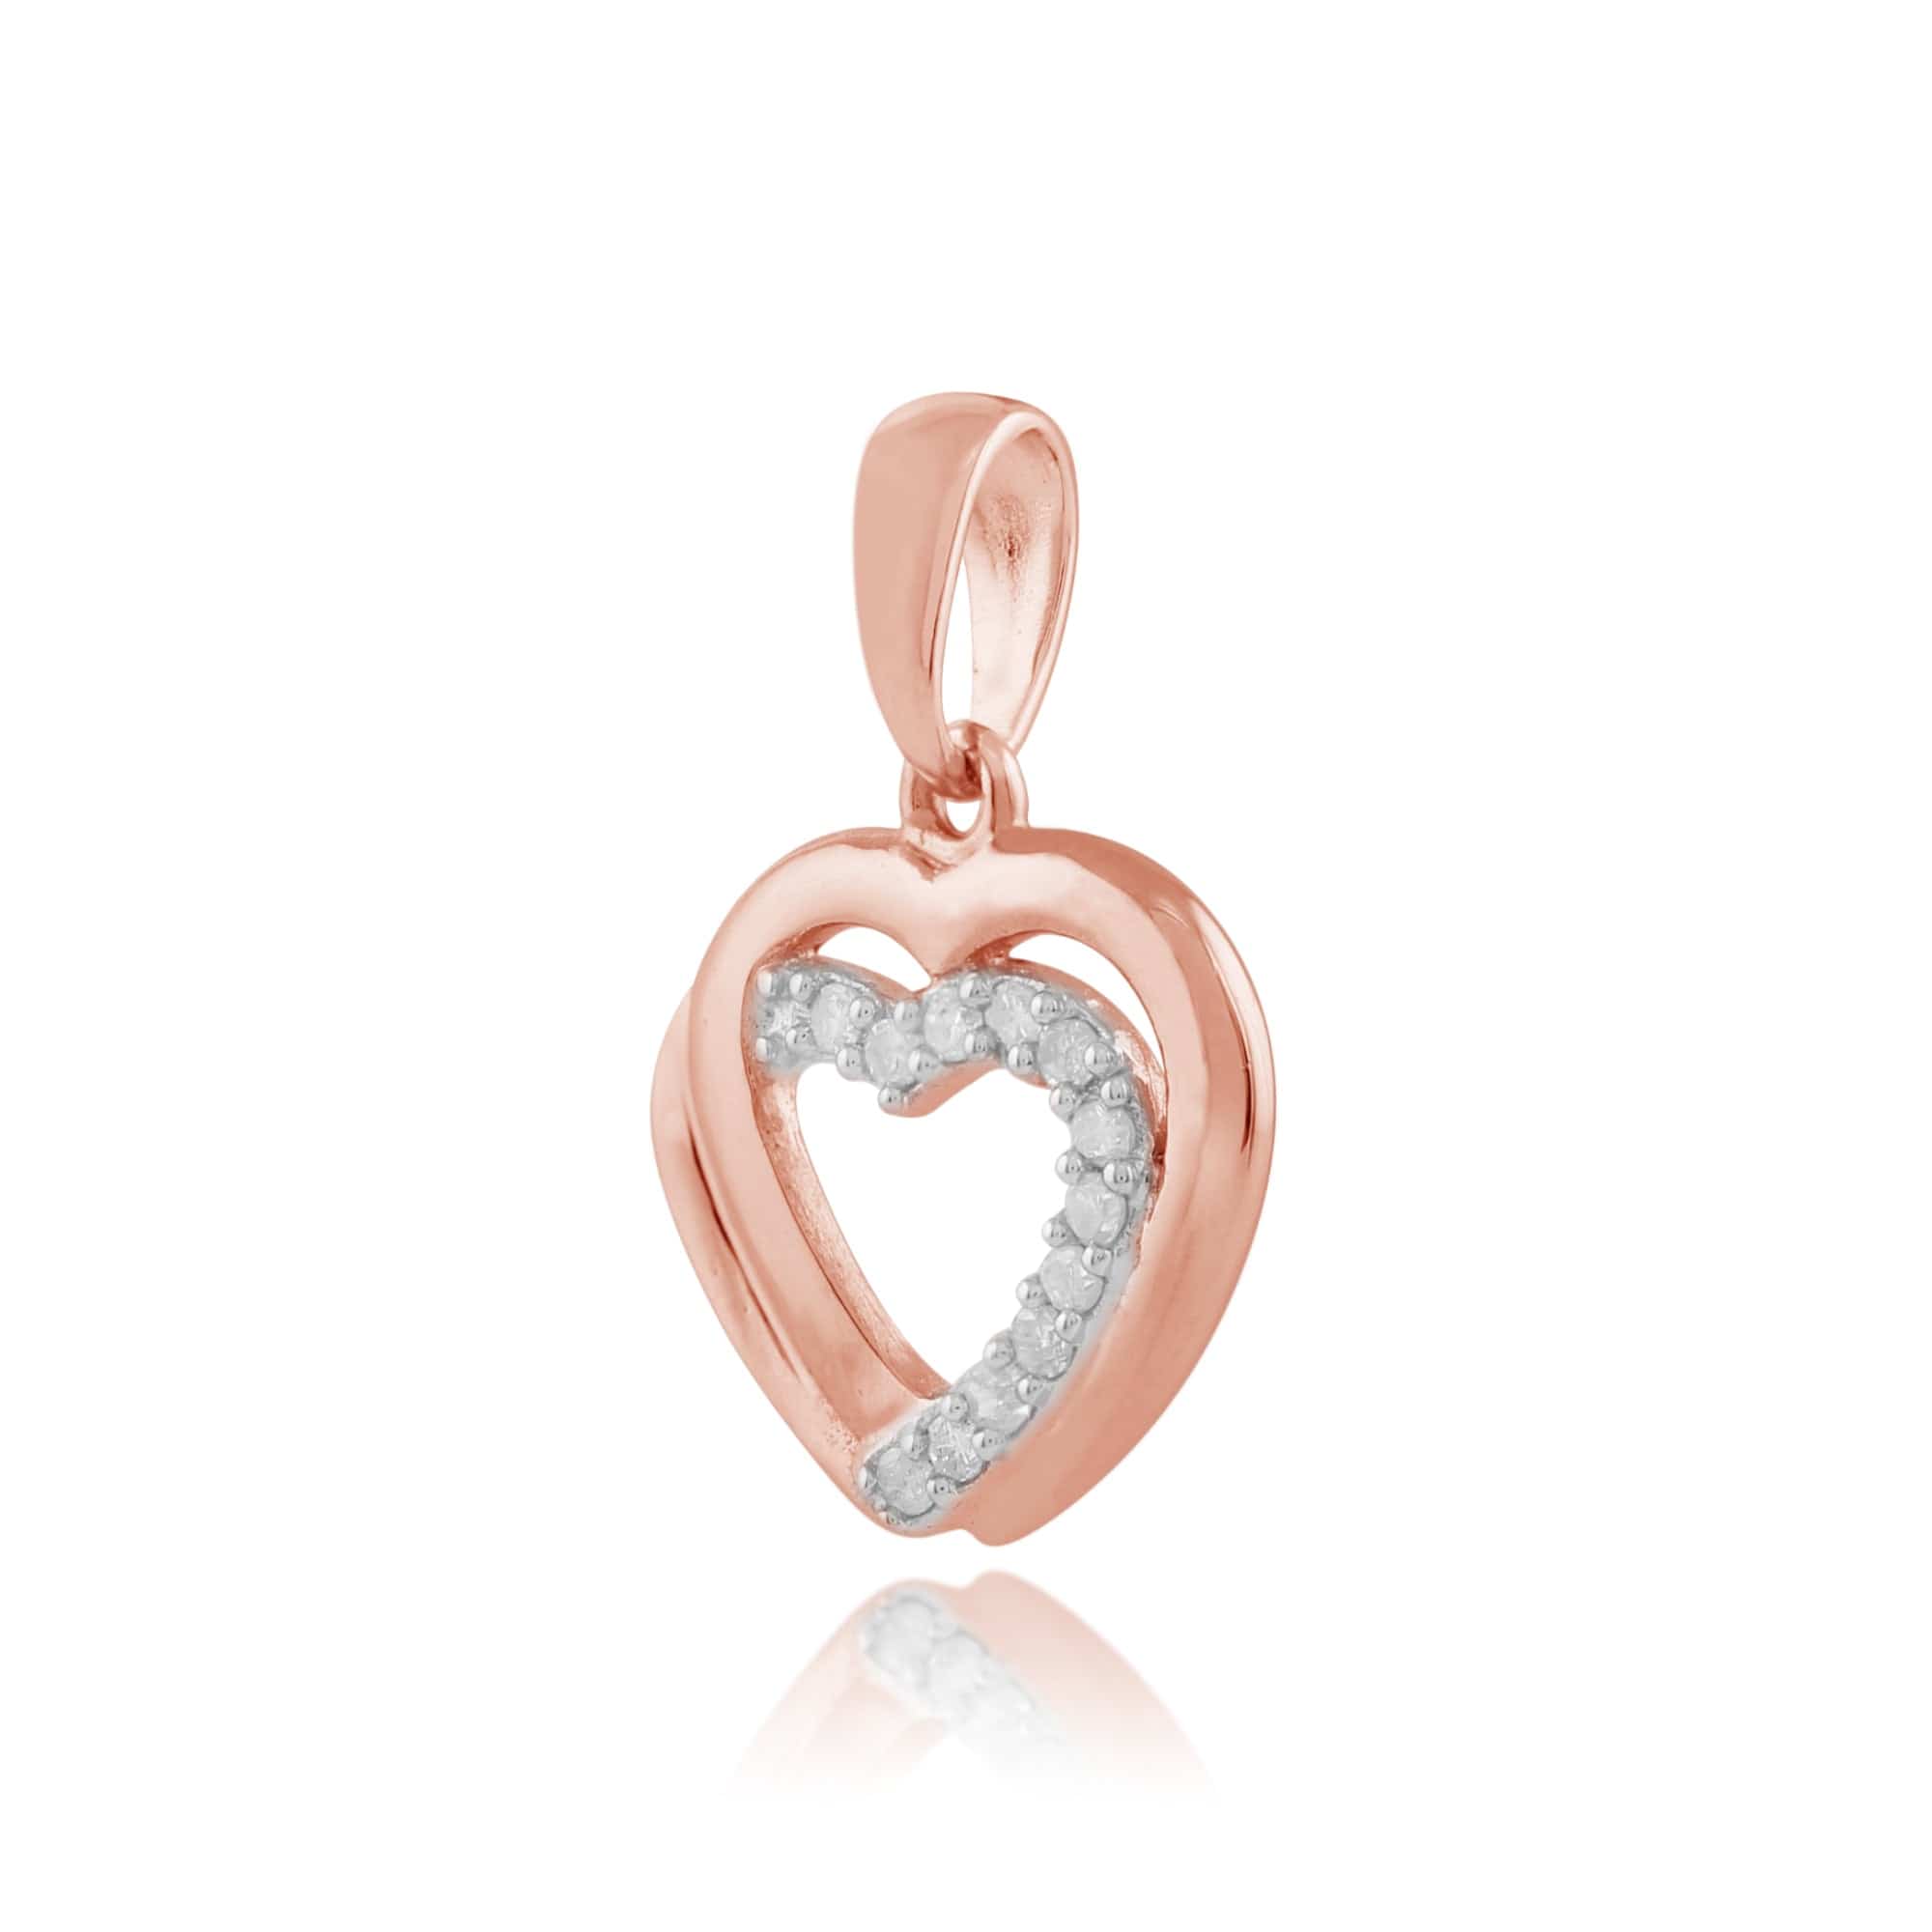 191E0357019-191P0698019 Classic Round Diamond Double Heart Drop Earrings & Pendant Set in 9ct Rose Gold 5